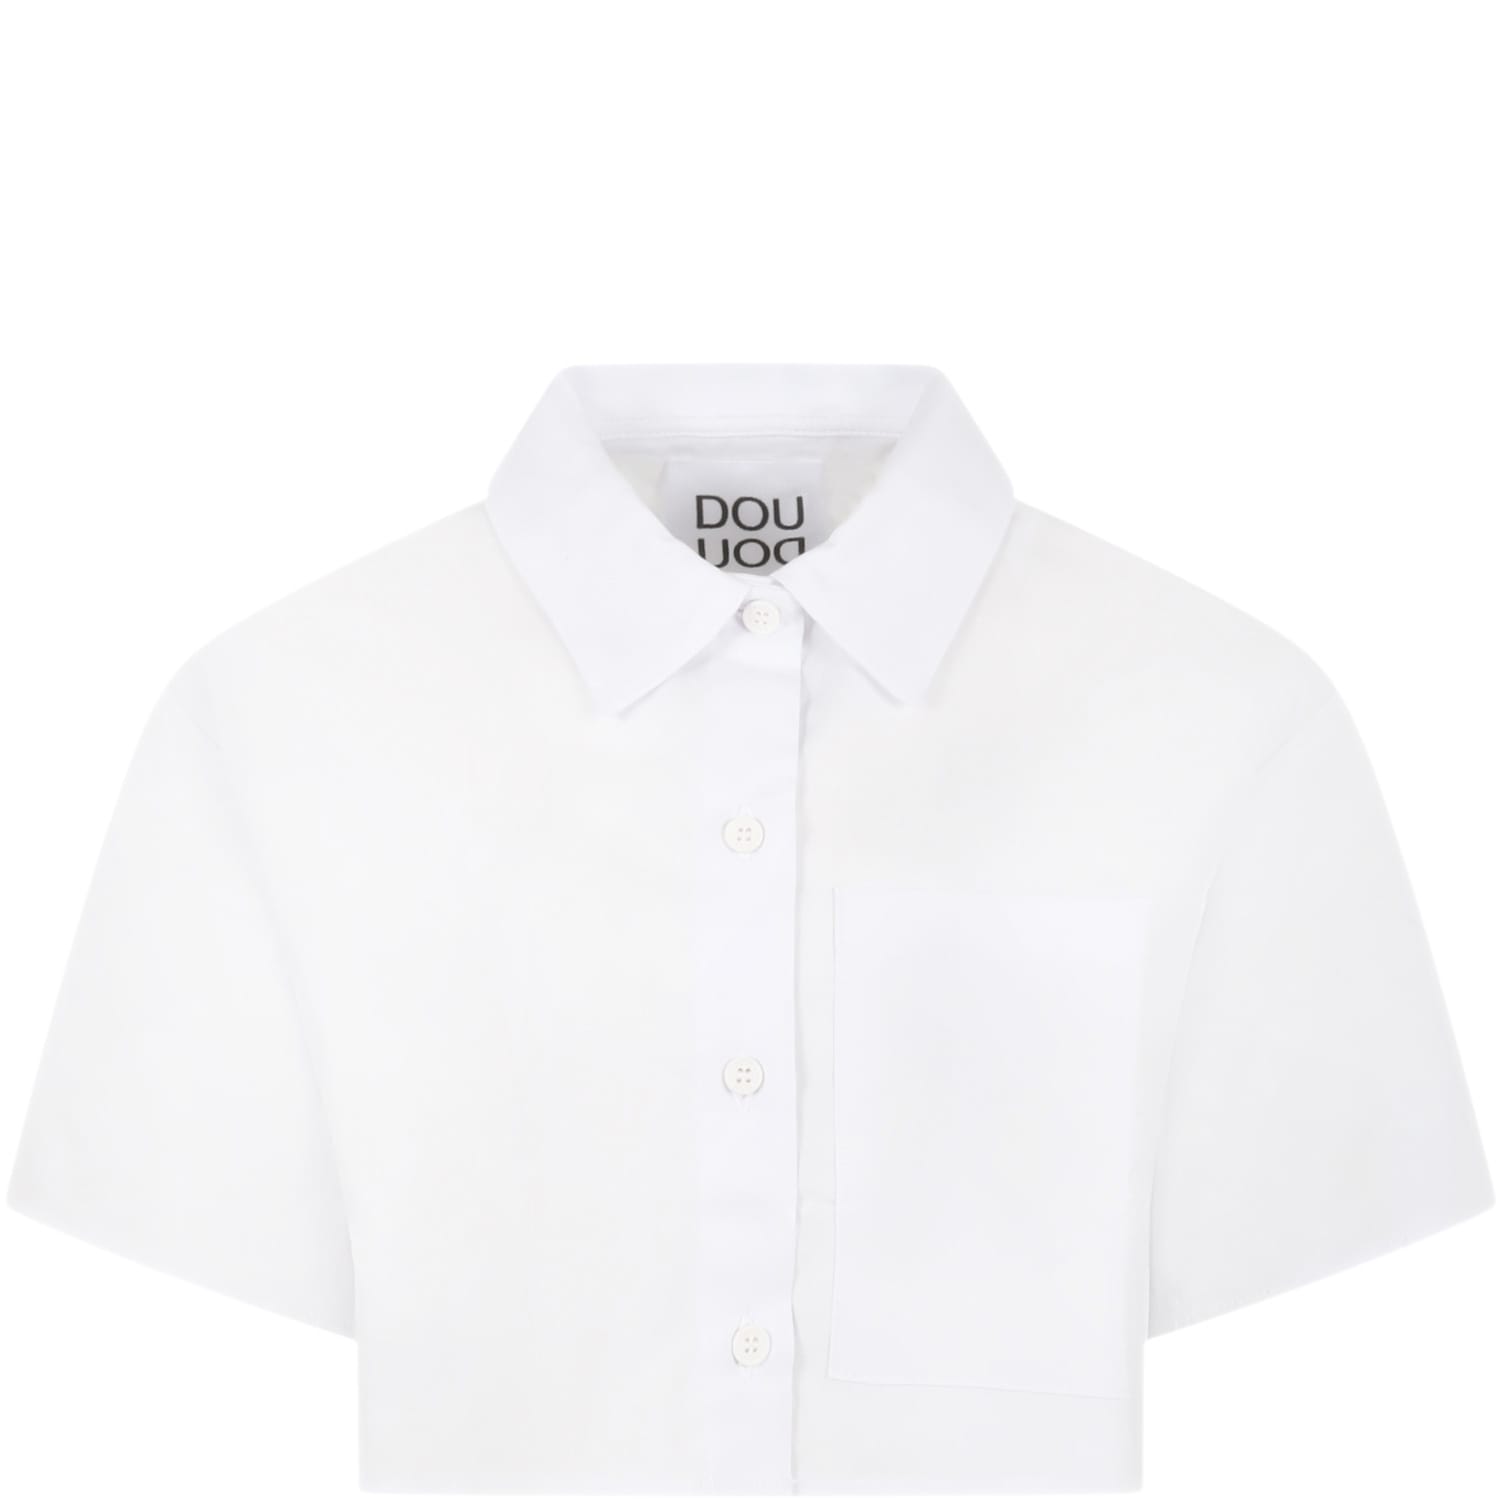 Douuod White Shirt For Girl With Black Logo